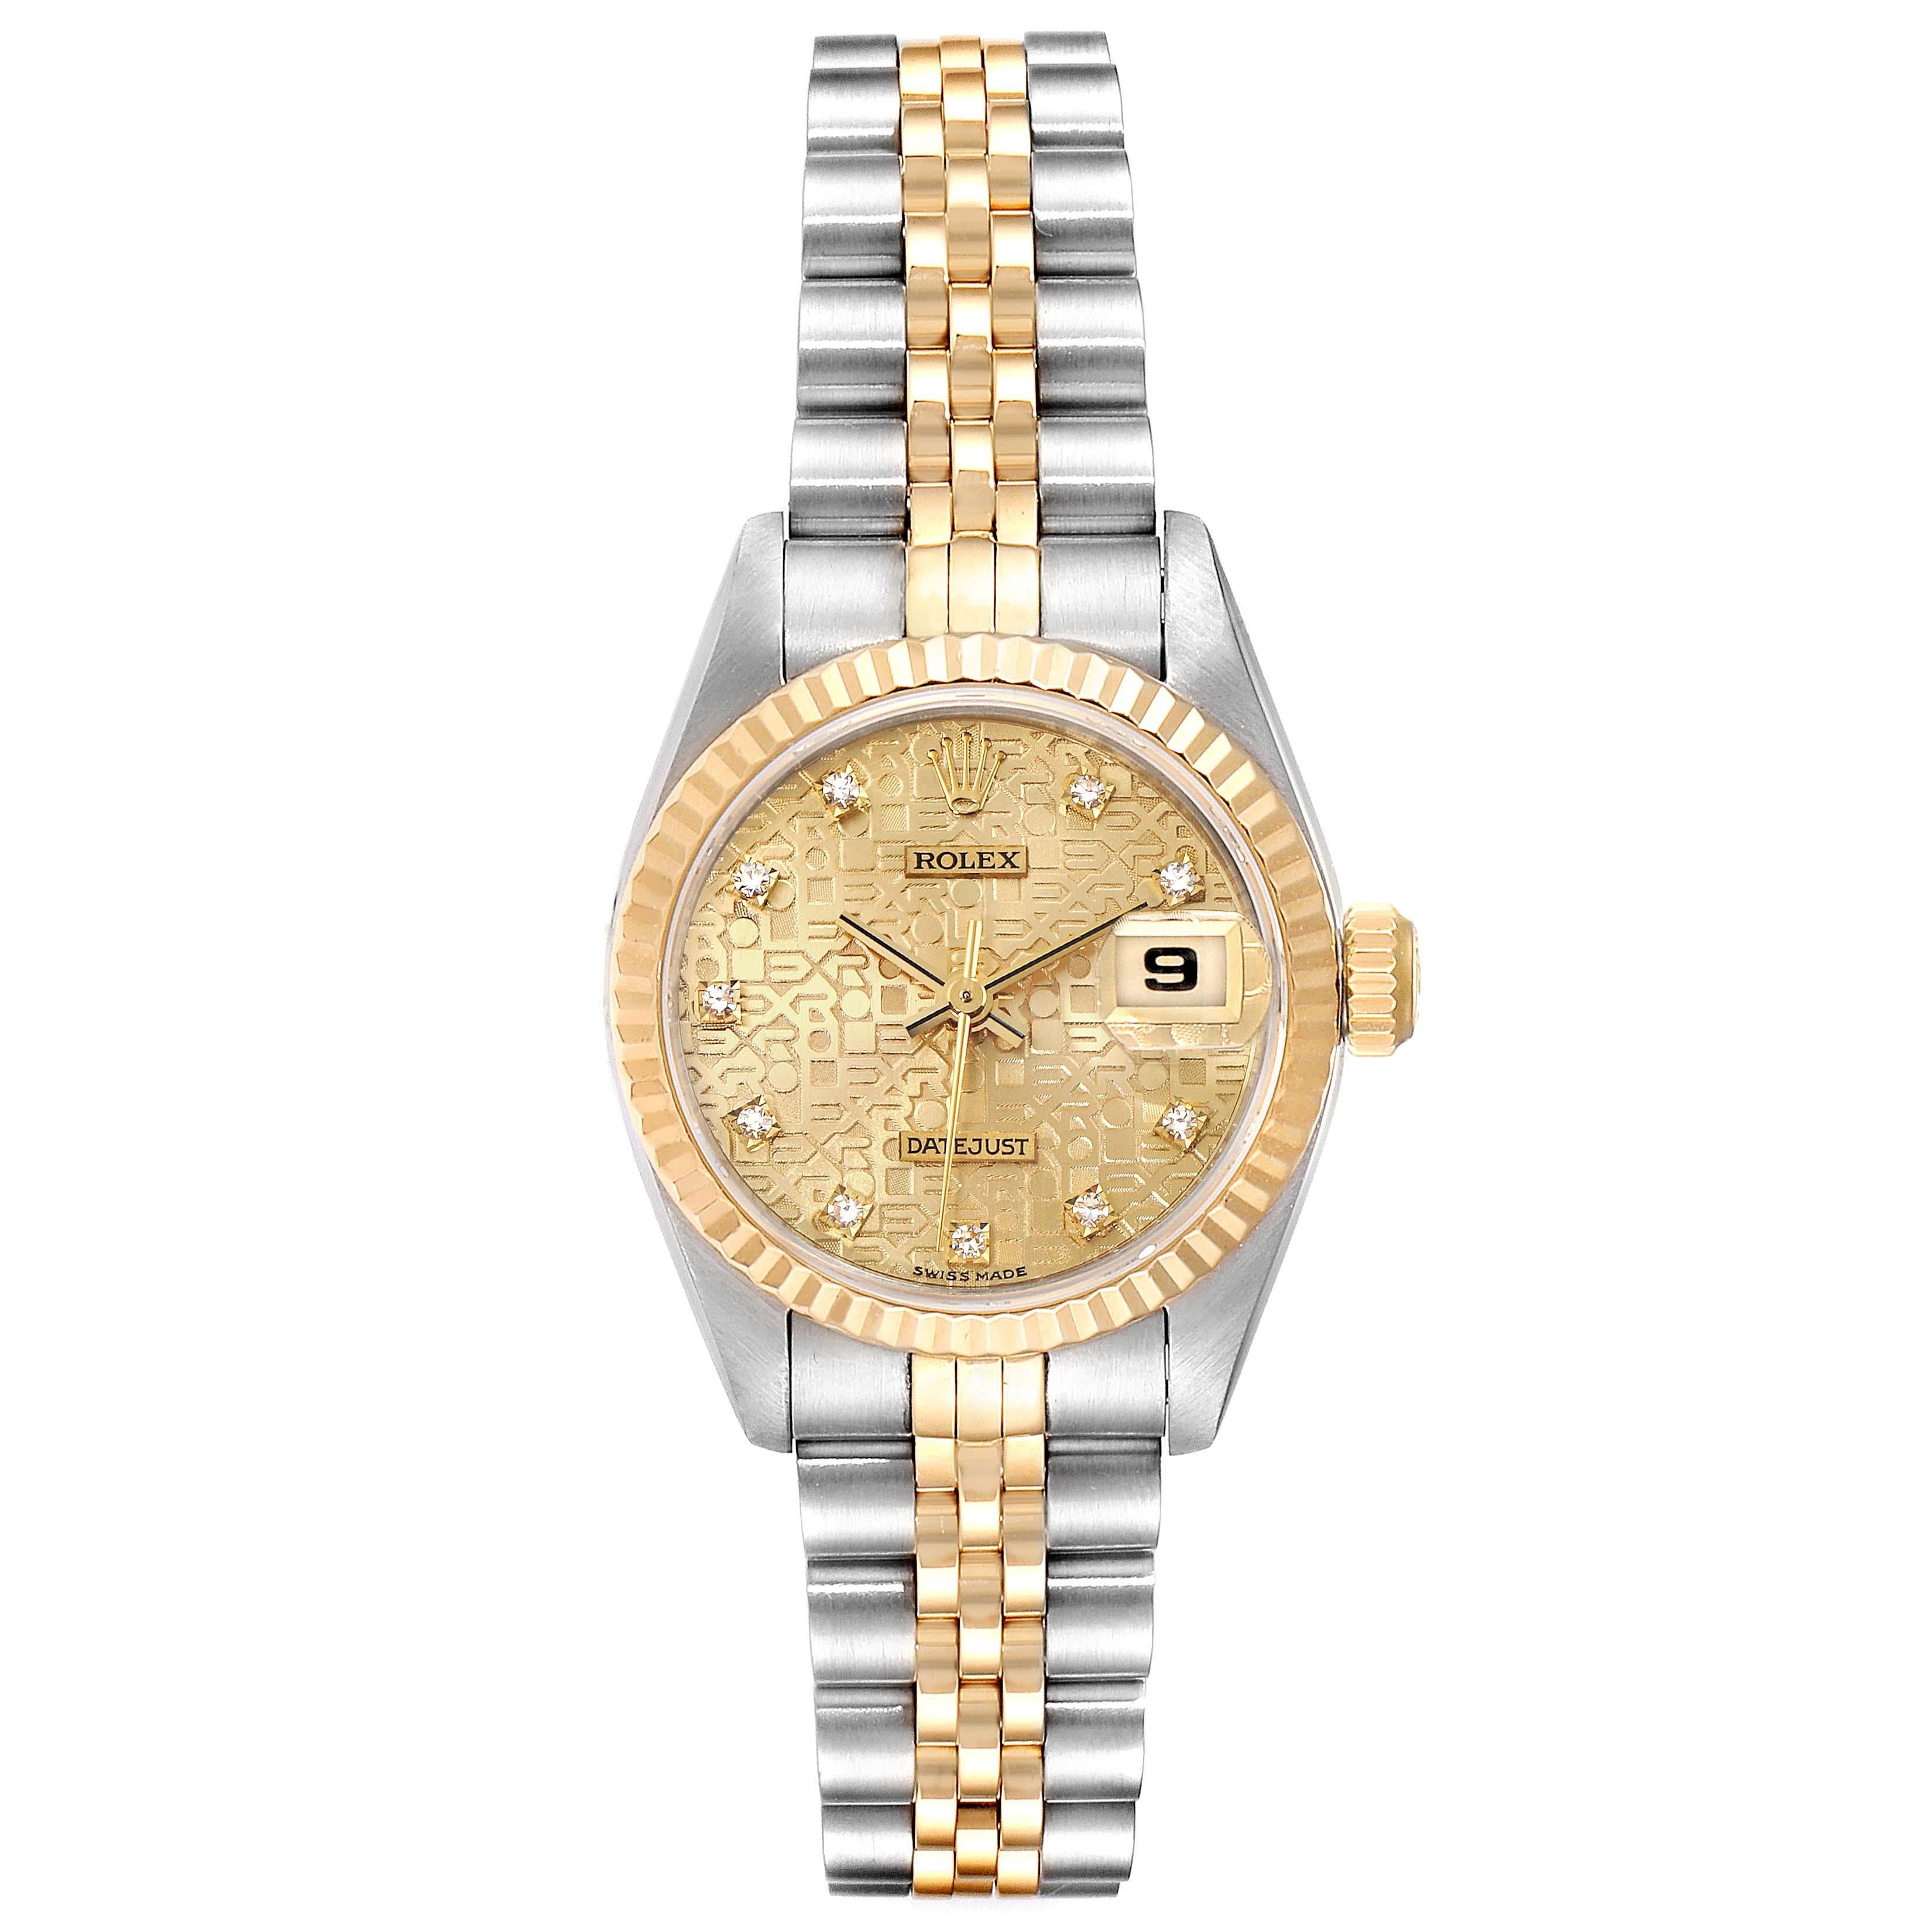 Rolex Datejust Steel Yellow Gold Jubilee Diamond Dial Ladies Watch 79173. Officially certified chronometer self-winding movement. Stainless steel oyster case 26.0 mm in diameter. Rolex logo on a 18K yellow gold crown. 18k yellow gold fluted bezel.